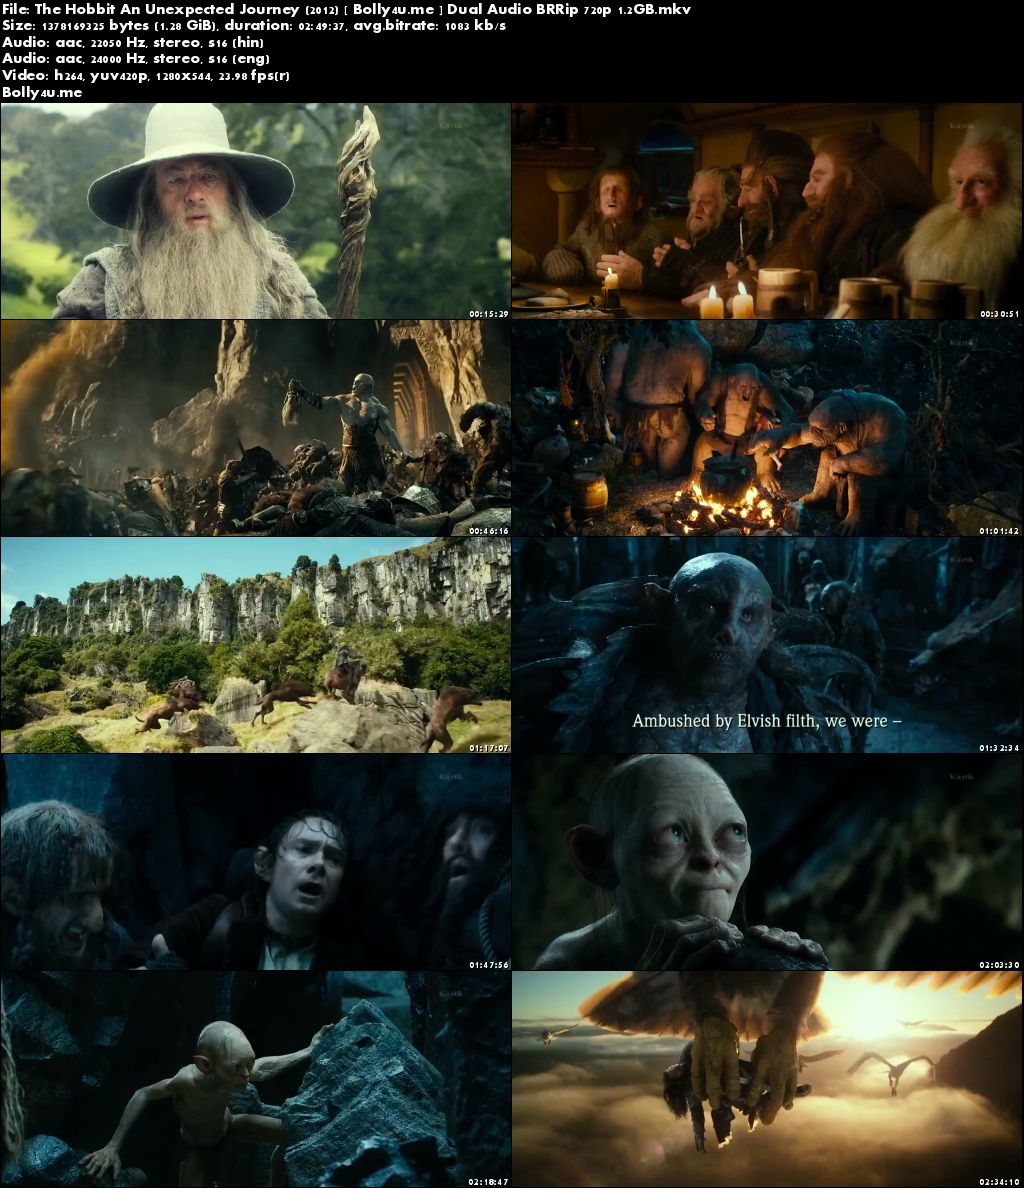 The Hobbit An Unexpected Journey 2012 BRRip Hindi Dual Audio 720p Download